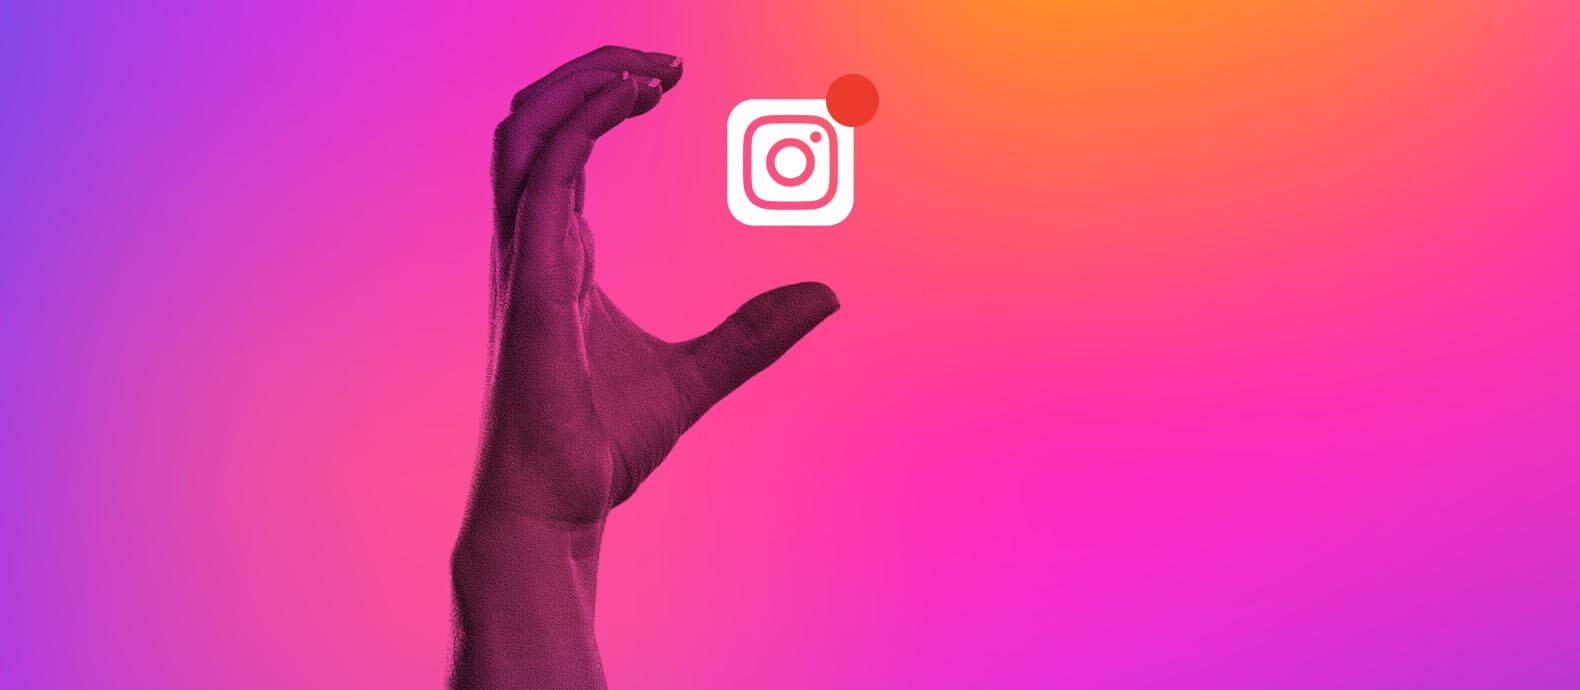 How to report a copyright infringement on Instagram